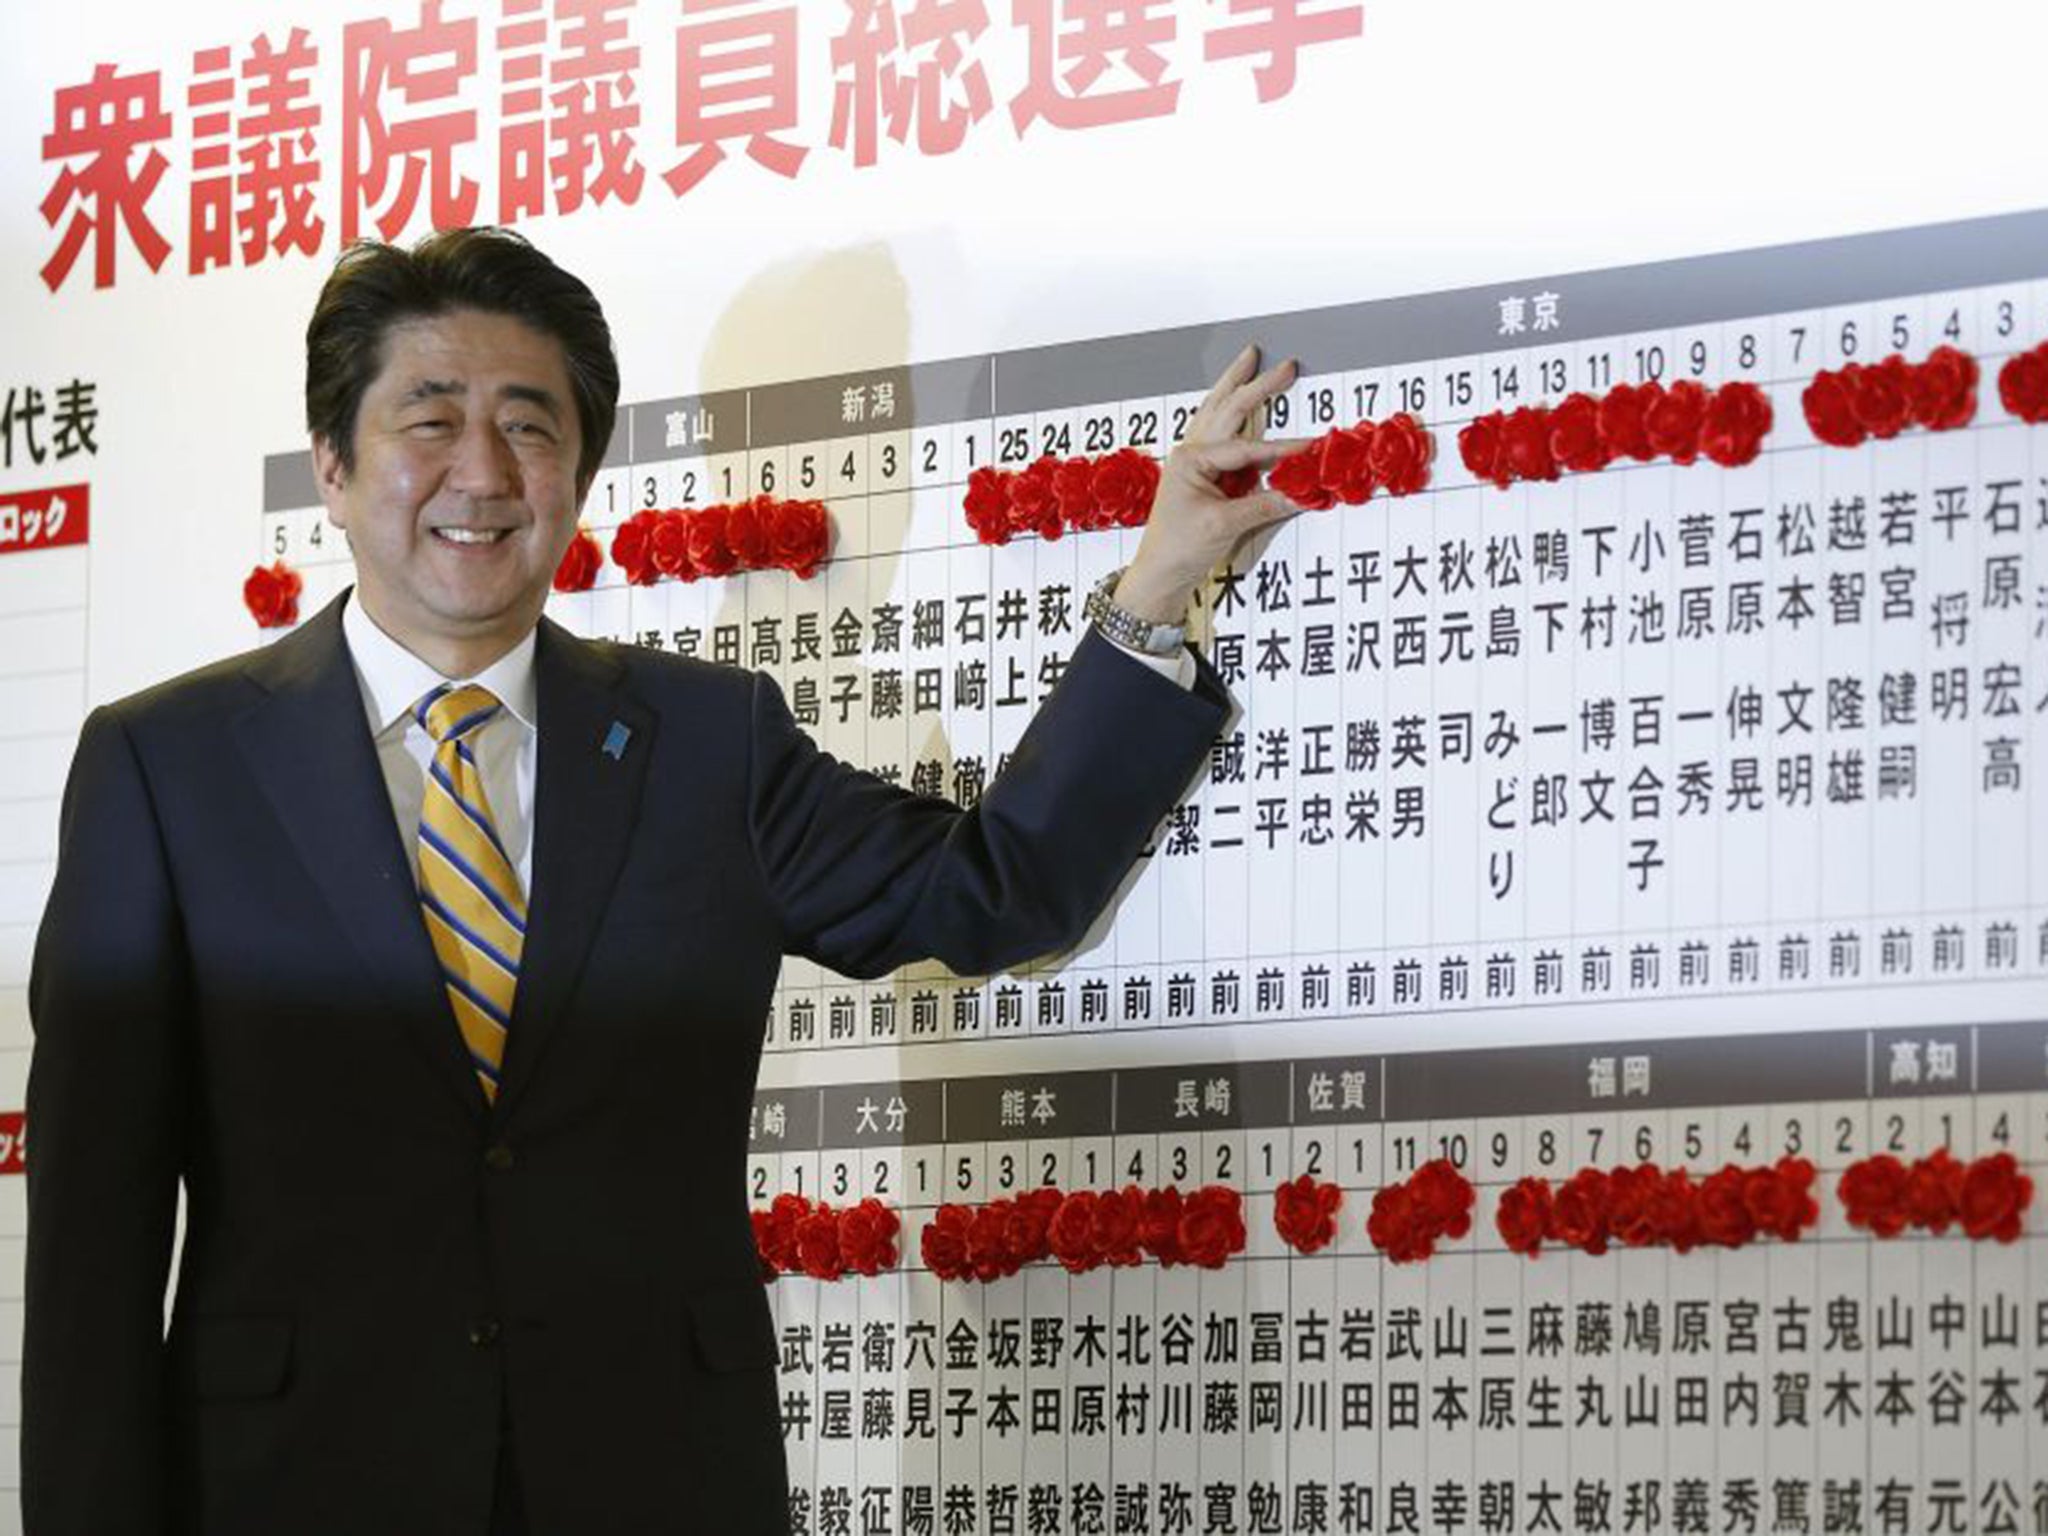 Shinzo Abe’s Liberal Democratic Party easily retained its majority in the House of Representatives